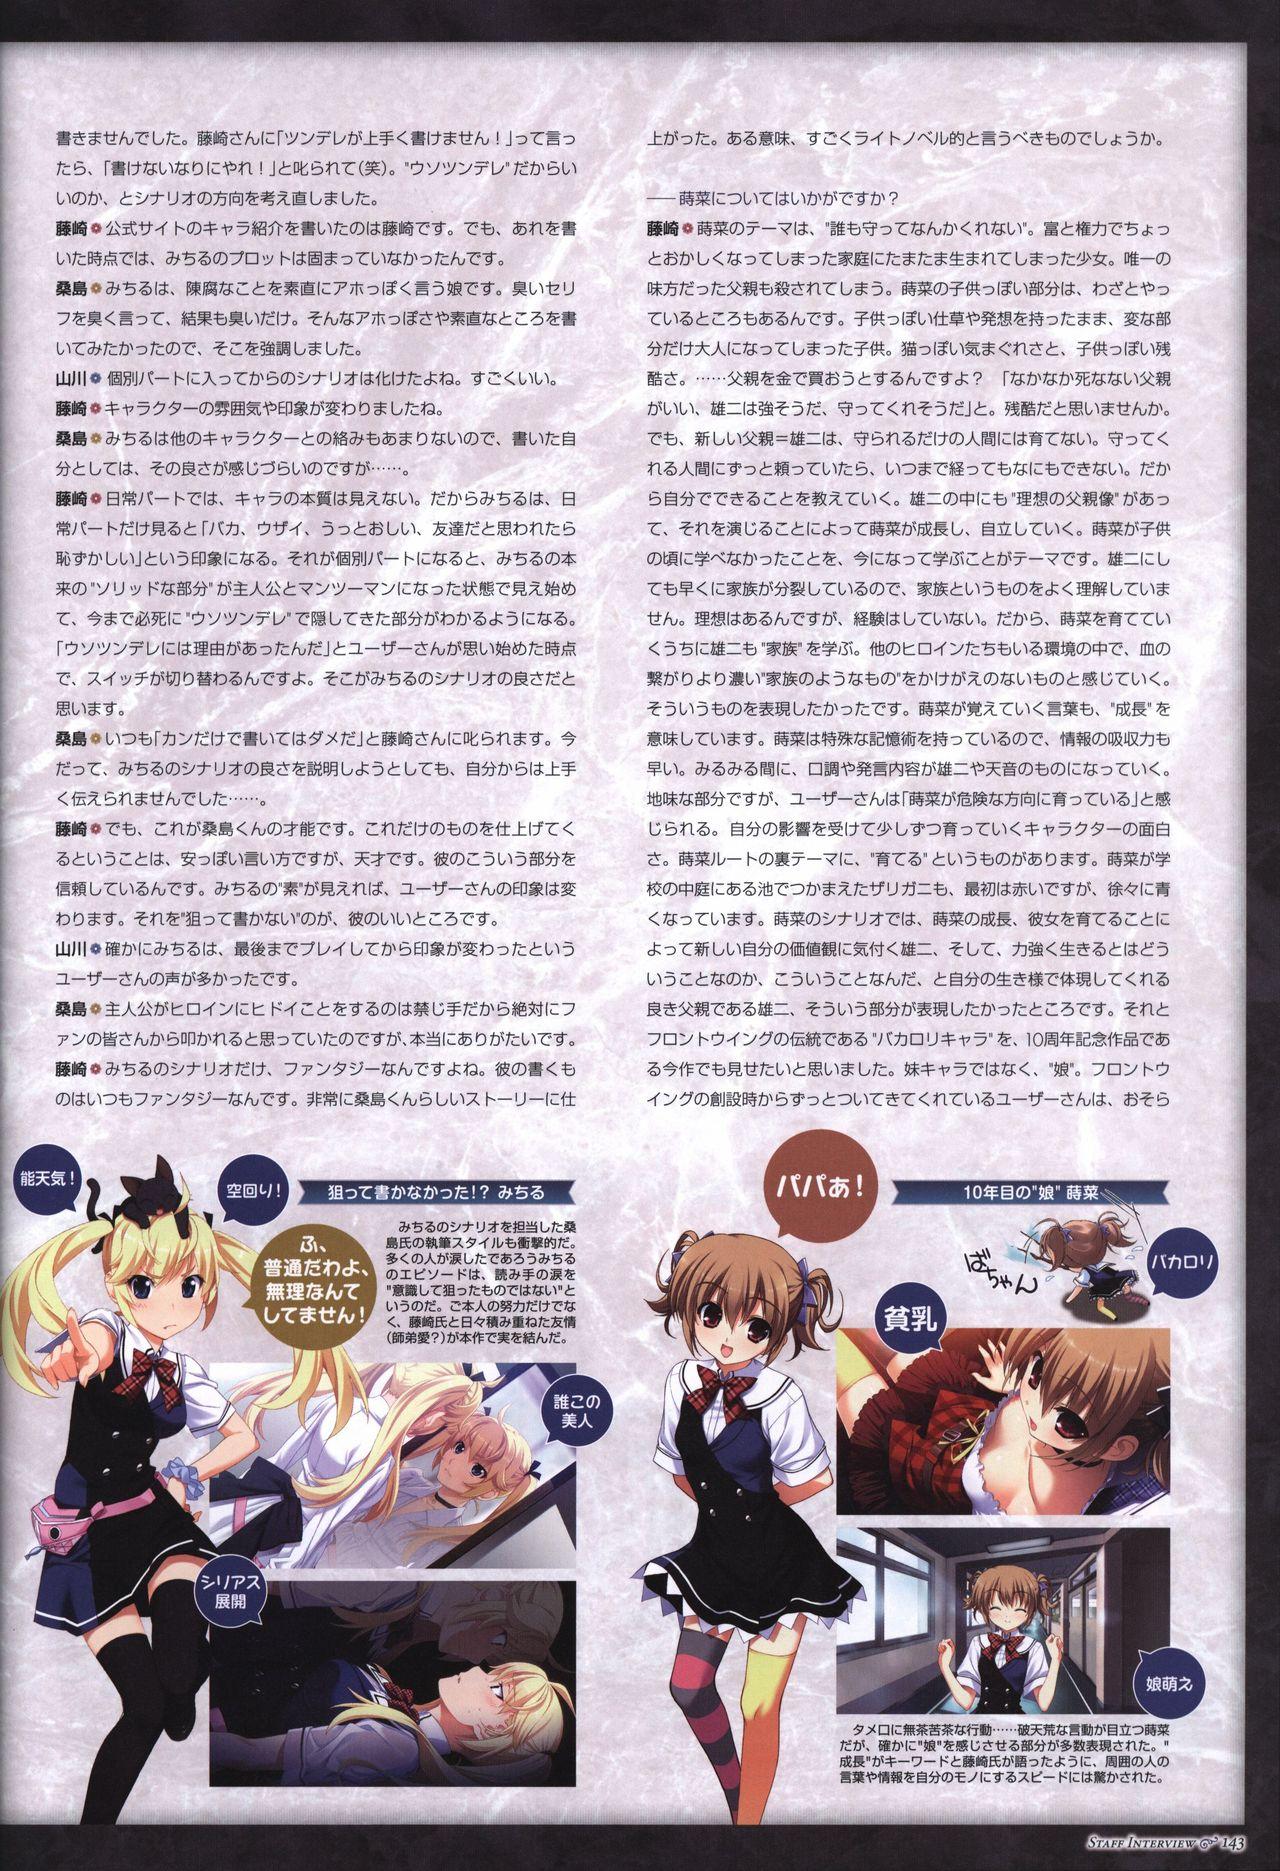 The Fruit of Grisaia Visual FanBook 143